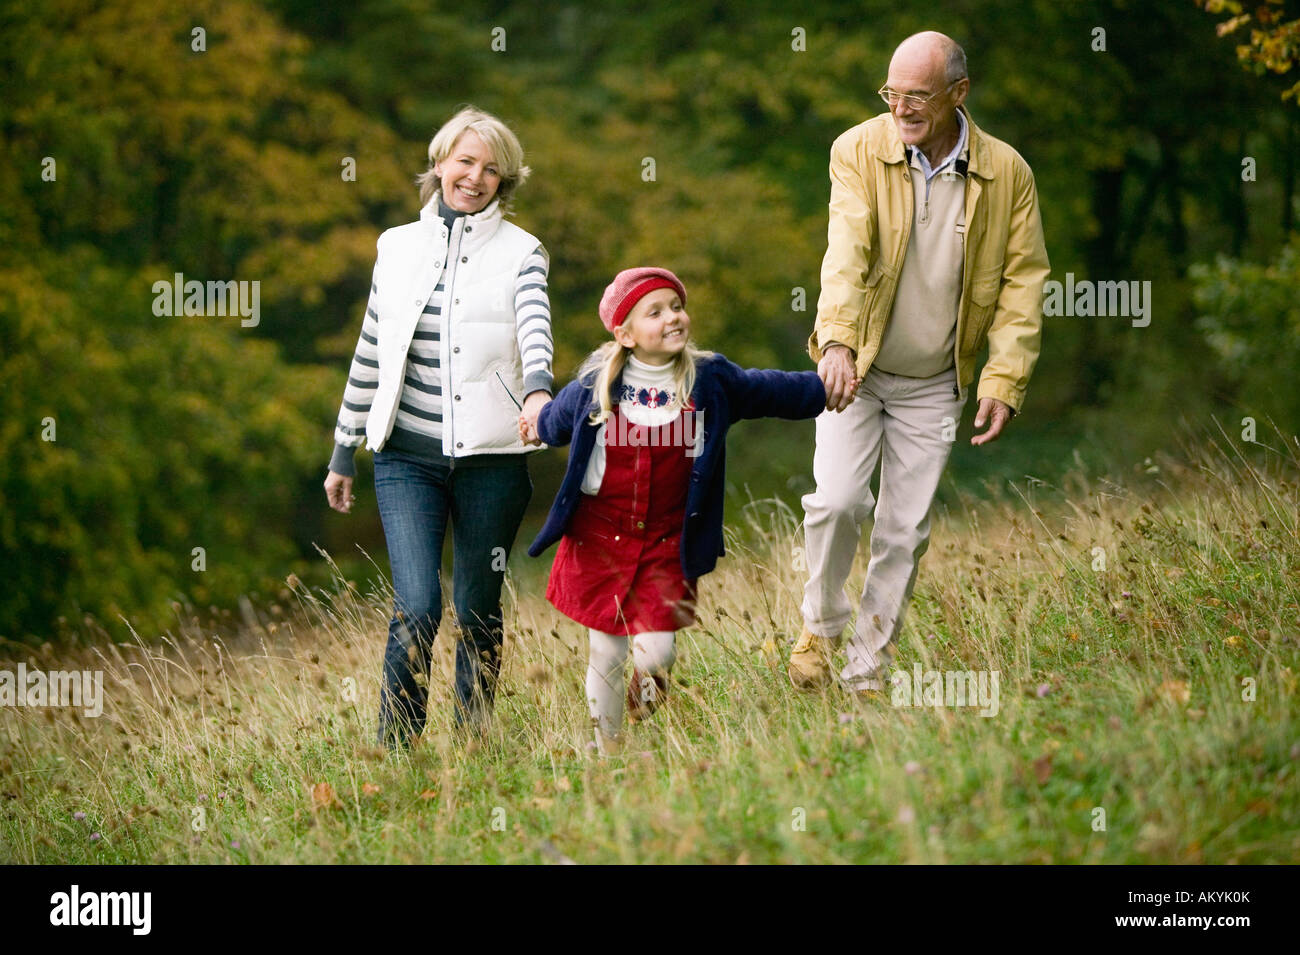 Germany, Baden-Württemberg, Swabby woodian mountains, Grandparents and granddoughter (6-7) walking in forest Stock Photo